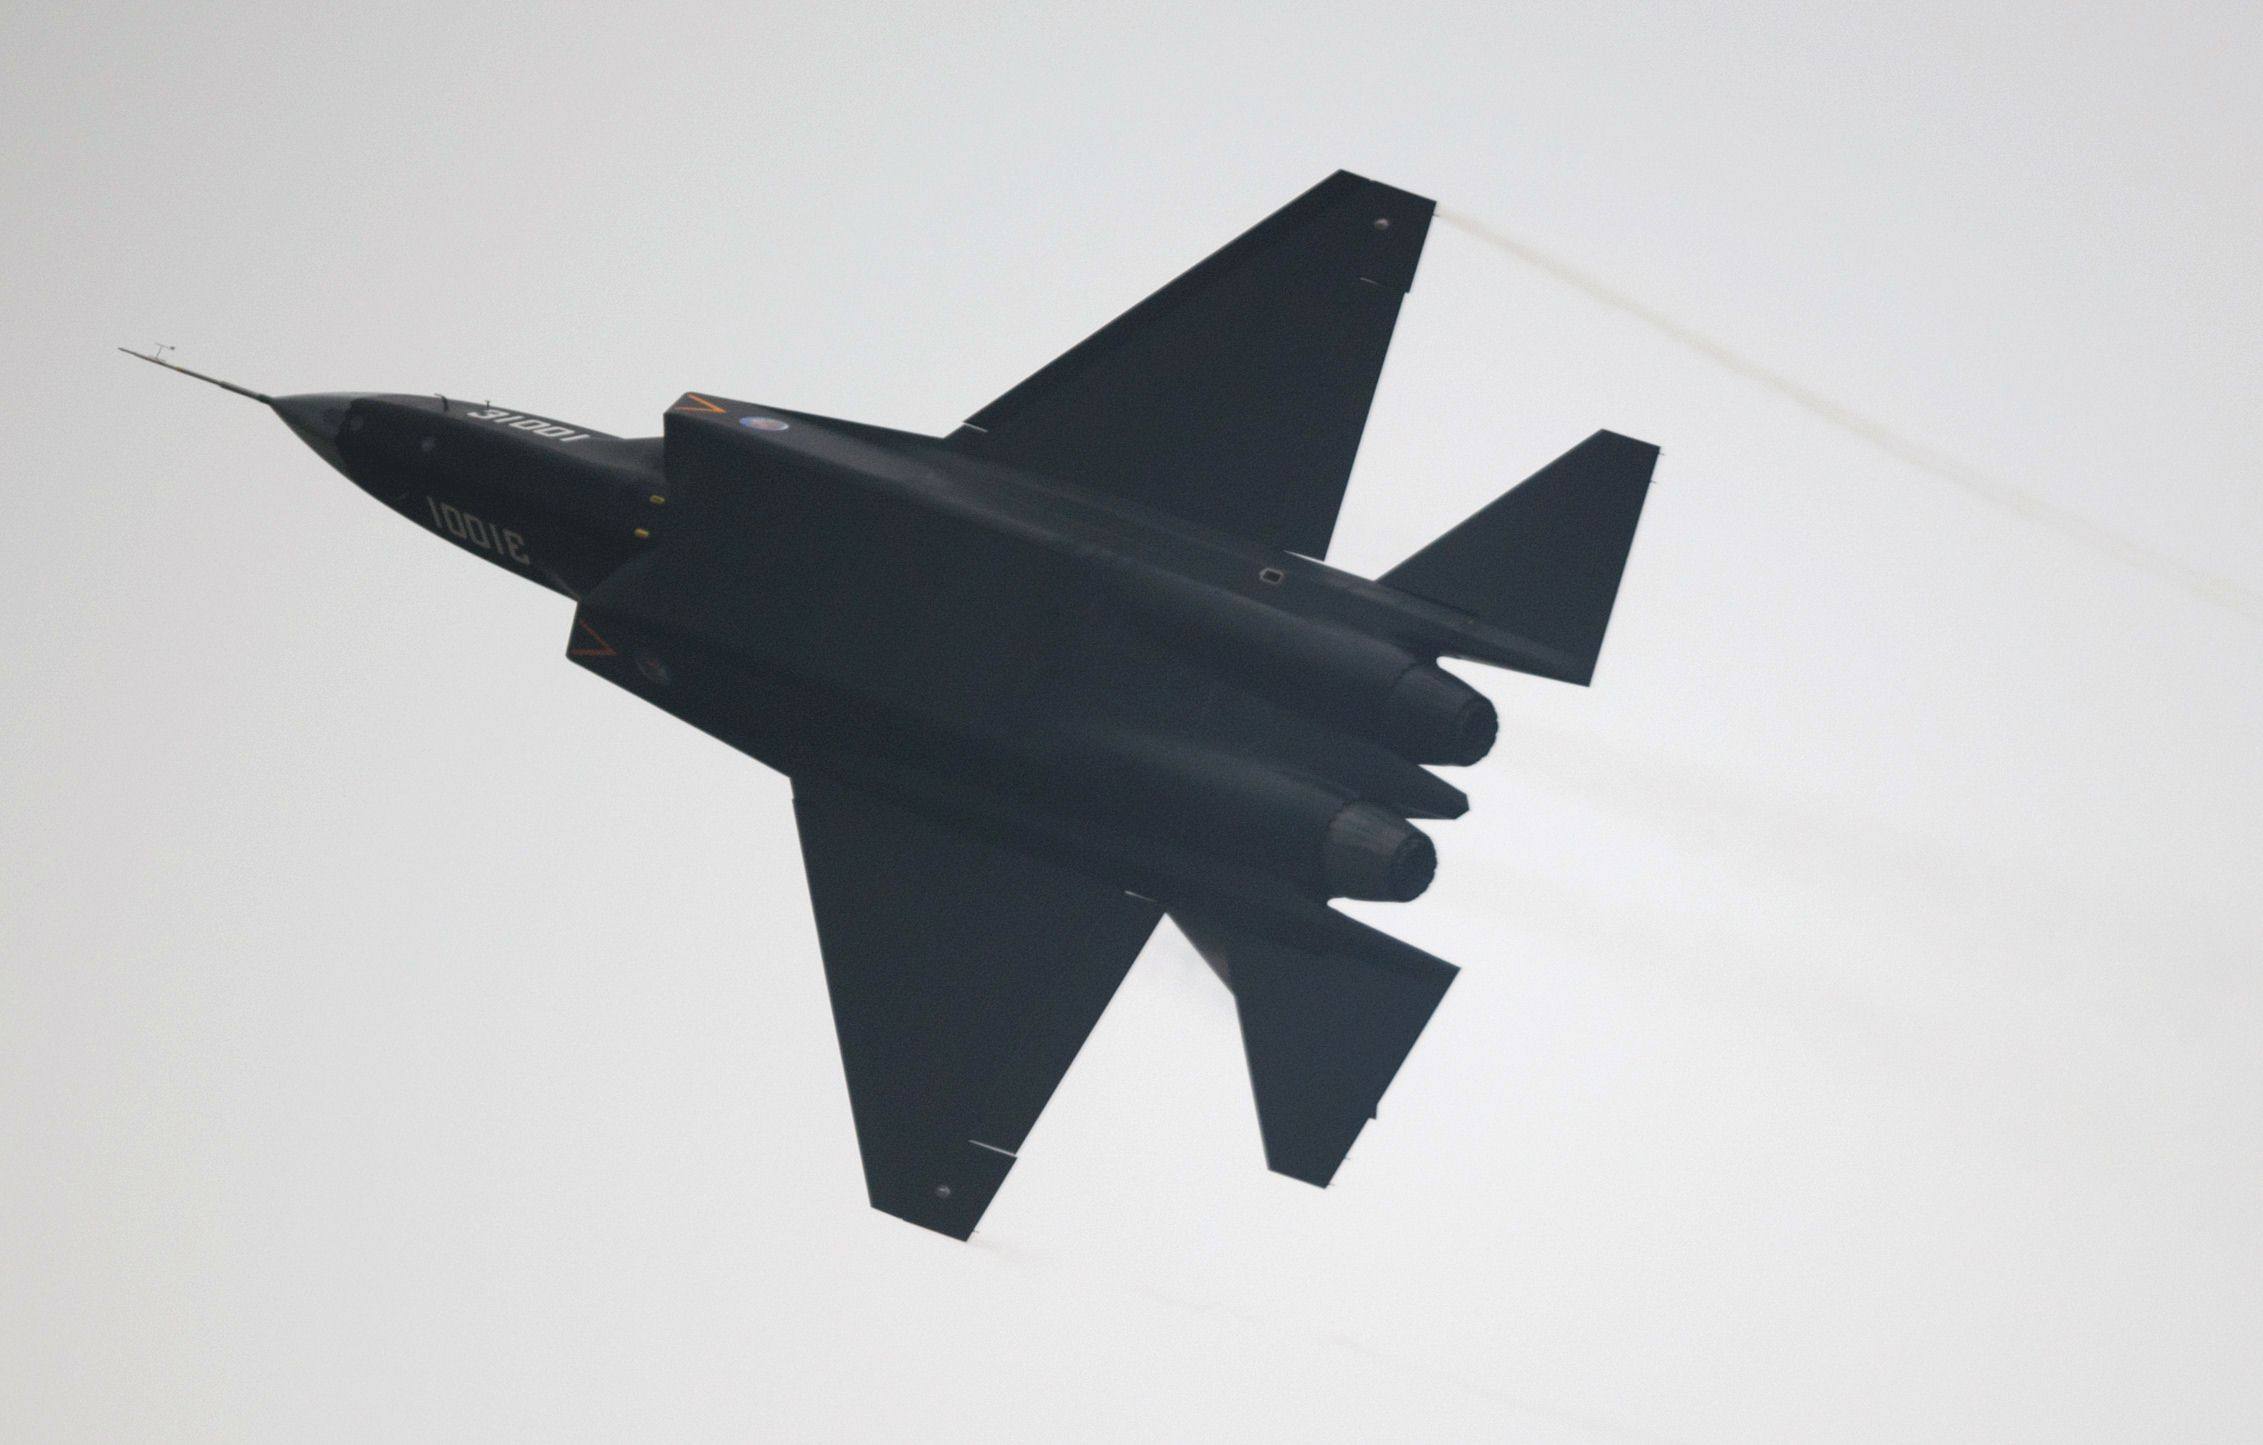 A Chinese J-31 stealth fighter. China has actively marketed the J-31 to foreign governments that do not have access to advanced Western military technology for political reasons. Photo: AFP